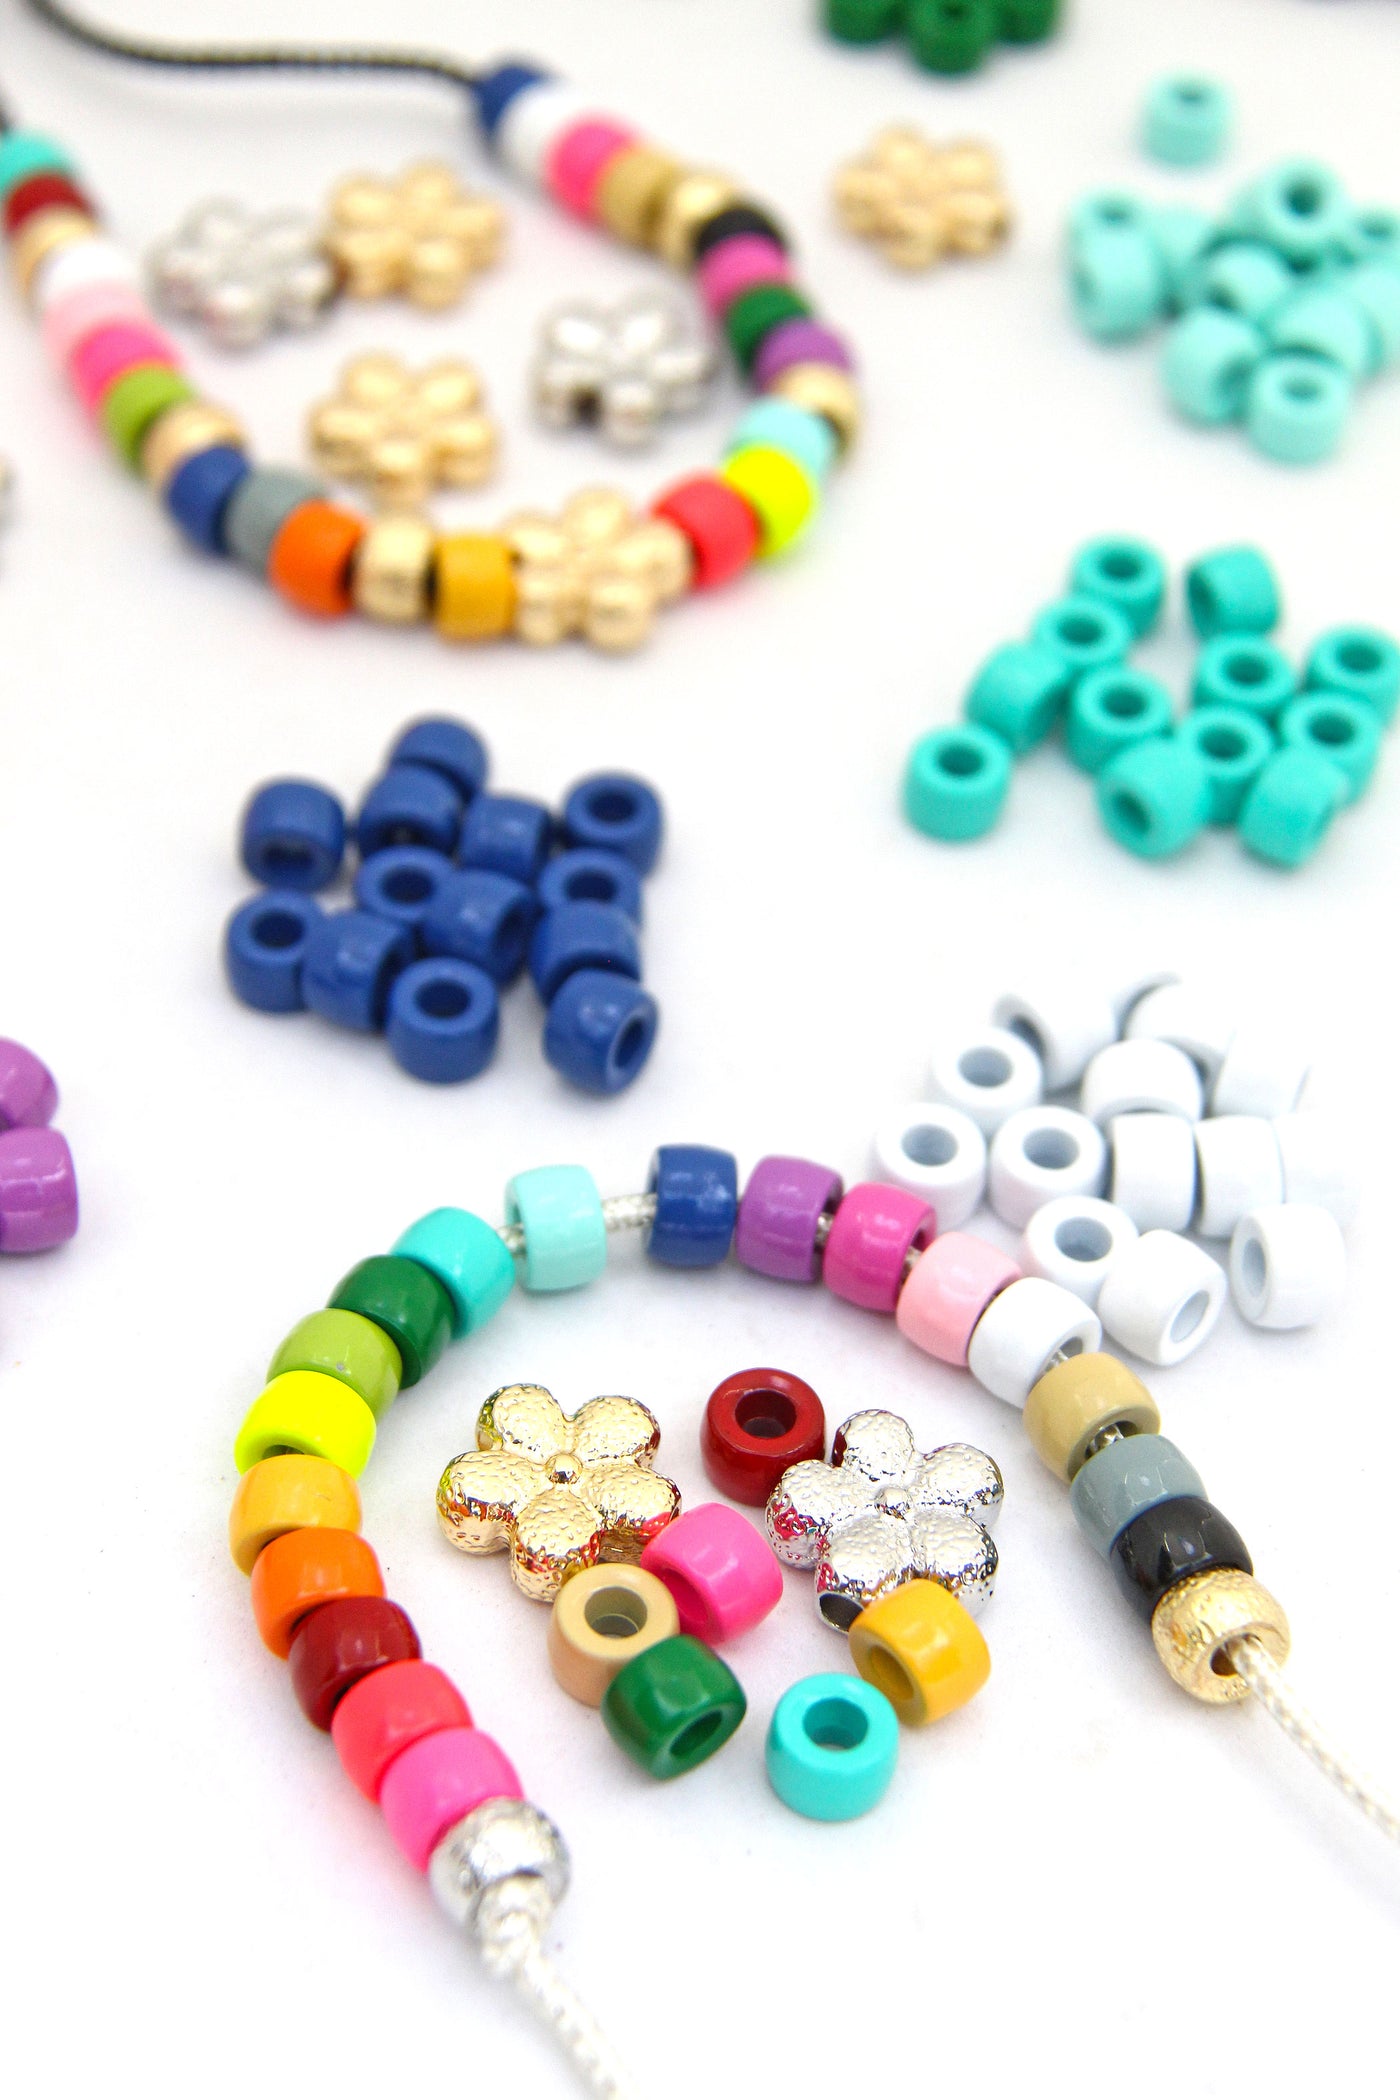 Colorful Beads for Tie-On Bracelets, Roller Beads, Gold Silver Stardust Florentine Flower Beads